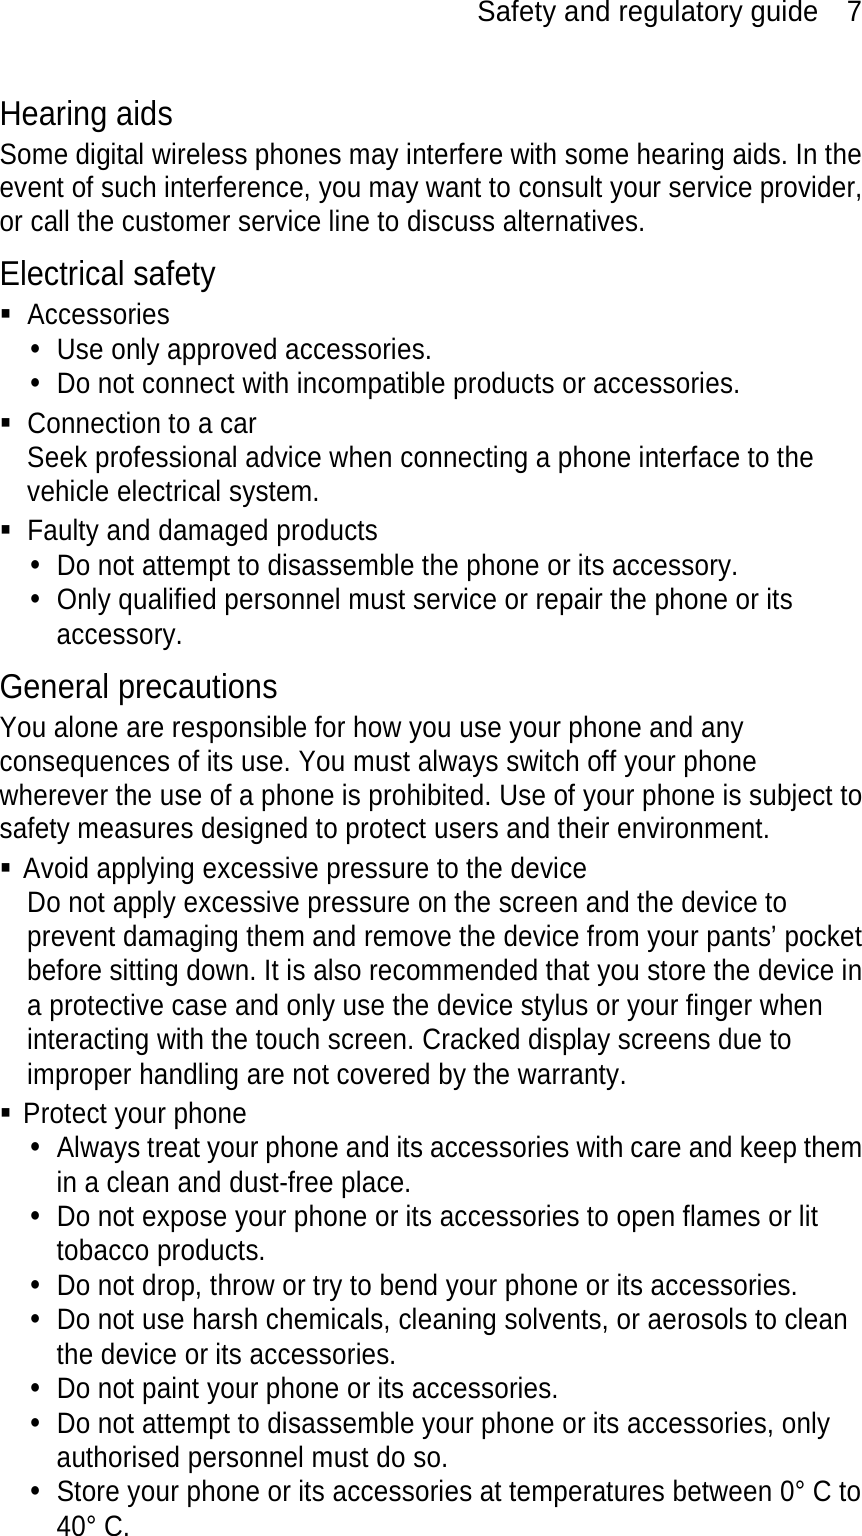 Safety and regulatory guide    7 Hearing aids Some digital wireless phones may interfere with some hearing aids. In the event of such interference, you may want to consult your service provider, or call the customer service line to discuss alternatives. Electrical safety  Accessories y  Use only approved accessories. y  Do not connect with incompatible products or accessories.   Connection to a car Seek professional advice when connecting a phone interface to the vehicle electrical system.   Faulty and damaged products y  Do not attempt to disassemble the phone or its accessory. y  Only qualified personnel must service or repair the phone or its accessory.  General precautions You alone are responsible for how you use your phone and any consequences of its use. You must always switch off your phone wherever the use of a phone is prohibited. Use of your phone is subject to safety measures designed to protect users and their environment.   Avoid applying excessive pressure to the device Do not apply excessive pressure on the screen and the device to prevent damaging them and remove the device from your pants’ pocket before sitting down. It is also recommended that you store the device in a protective case and only use the device stylus or your finger when interacting with the touch screen. Cracked display screens due to improper handling are not covered by the warranty.  Protect your phone y  Always treat your phone and its accessories with care and keep them in a clean and dust-free place. y  Do not expose your phone or its accessories to open flames or lit tobacco products. y  Do not drop, throw or try to bend your phone or its accessories. y  Do not use harsh chemicals, cleaning solvents, or aerosols to clean the device or its accessories. y  Do not paint your phone or its accessories. y  Do not attempt to disassemble your phone or its accessories, only authorised personnel must do so. y  Store your phone or its accessories at temperatures between 0° C to 40° C. 